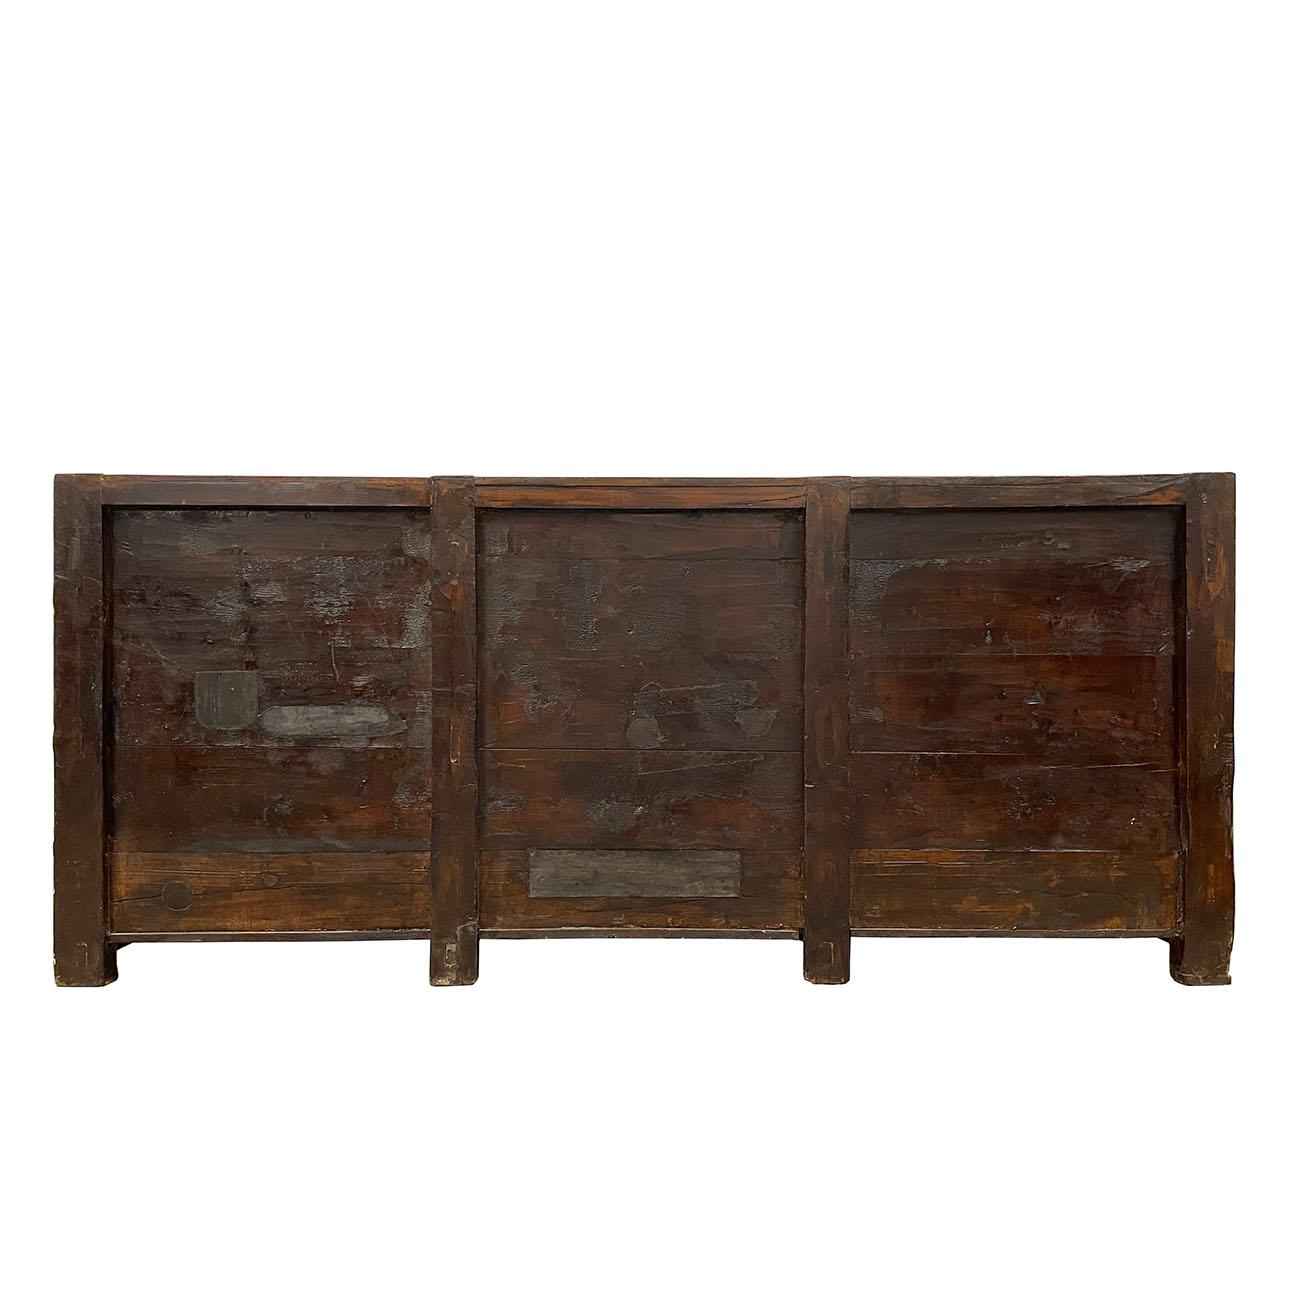 Late 19th Century Antique Chinese Mongolia Credenza, Sideboard, Buffet Table 8